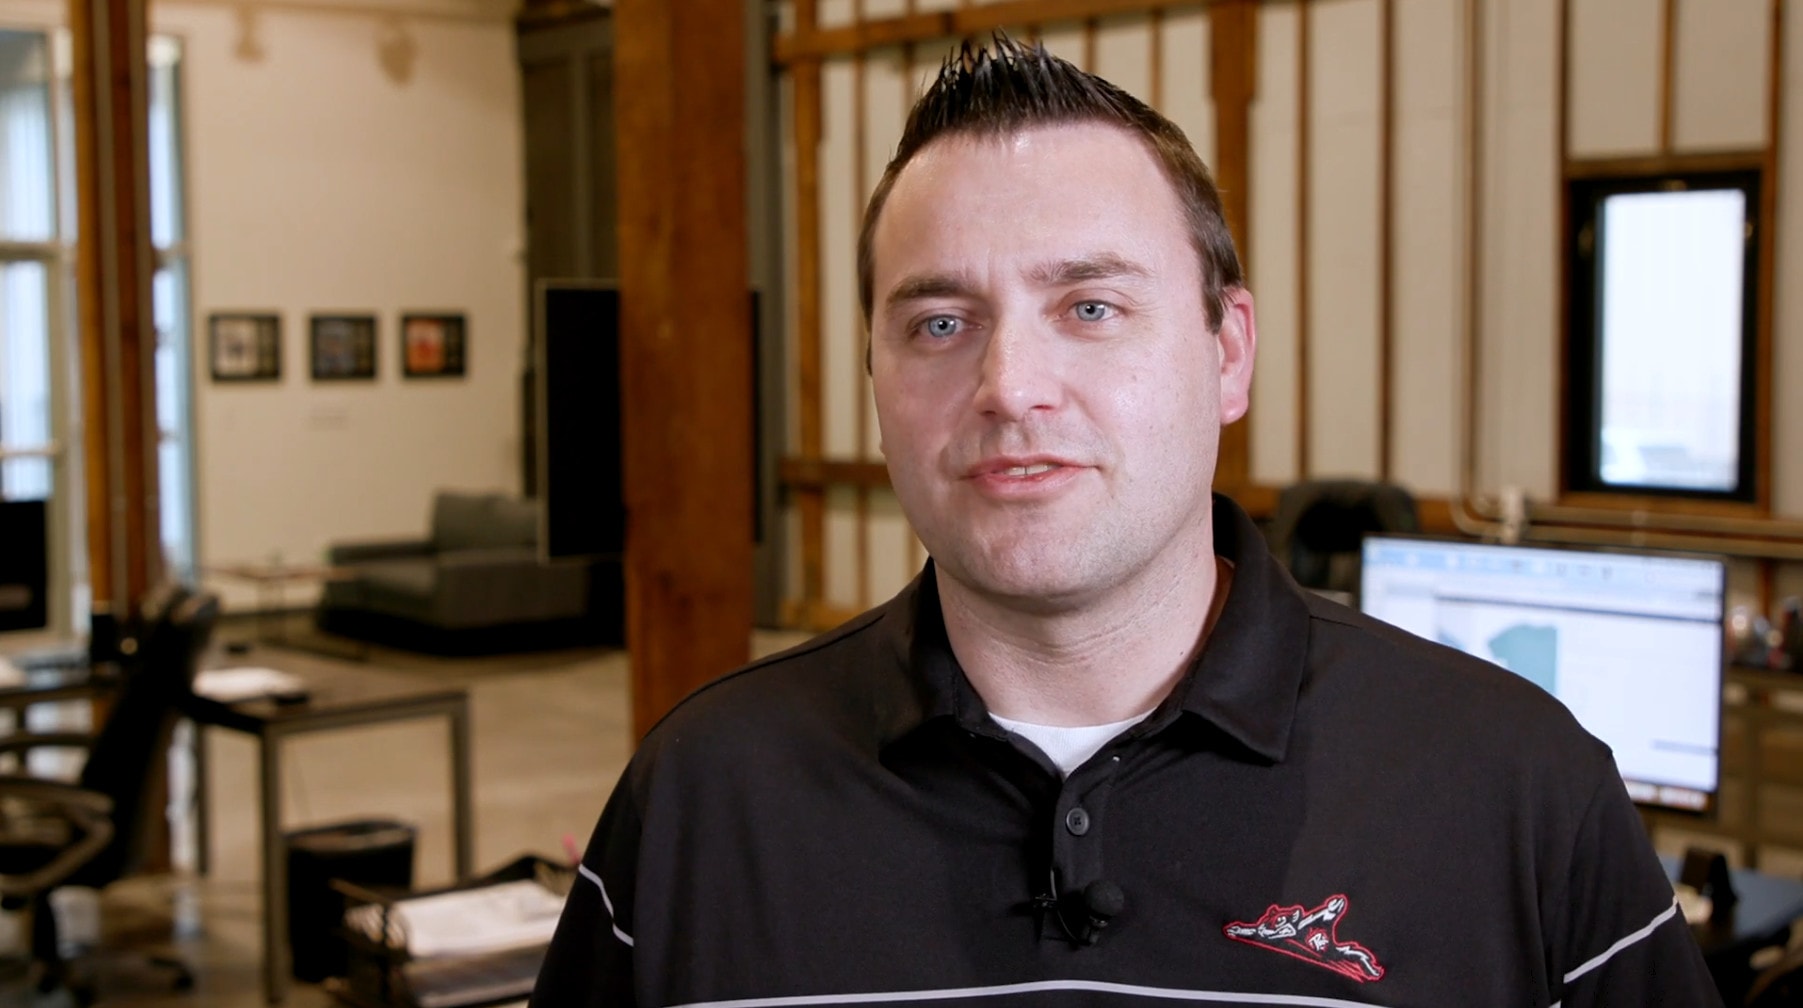 Watch what our client Flying Squirrels has to say about working with Brandito